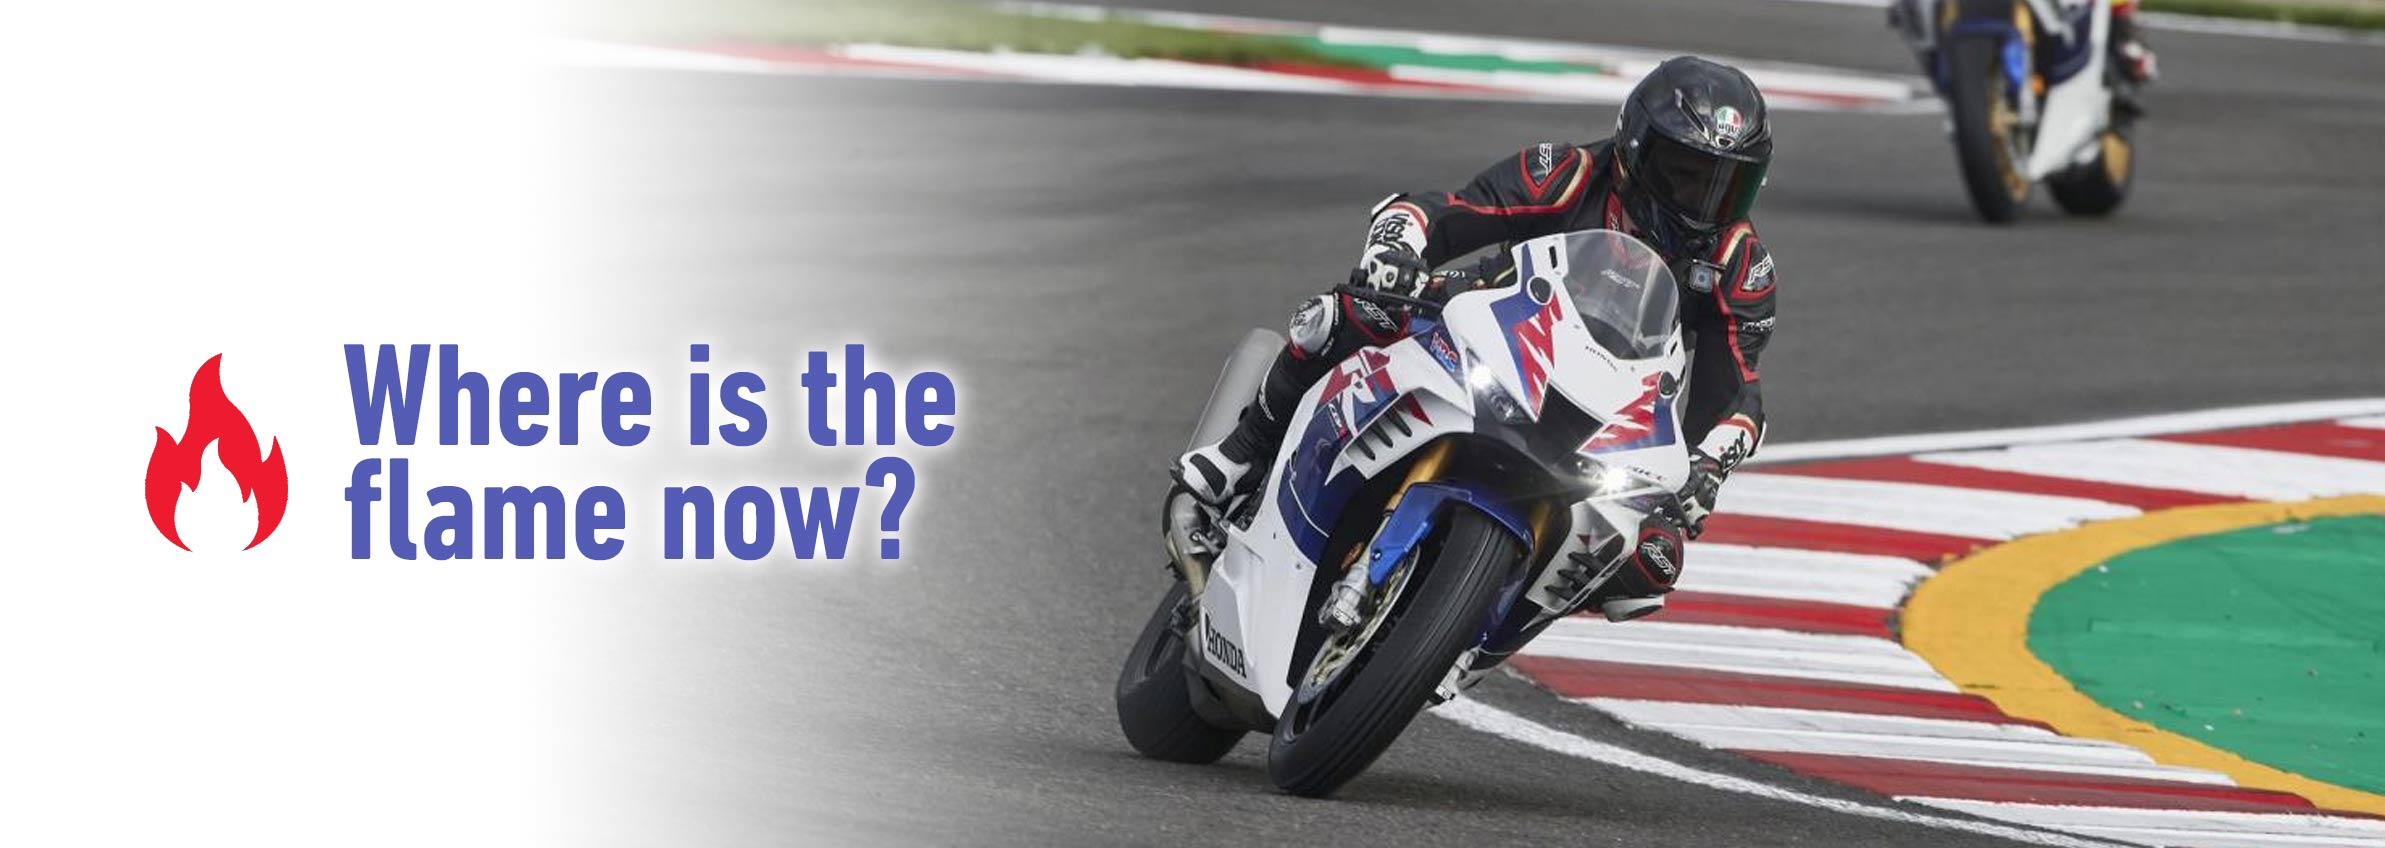 Flame on with the FireBlade - Fireblade CBR1000RR-RR - where is it now?